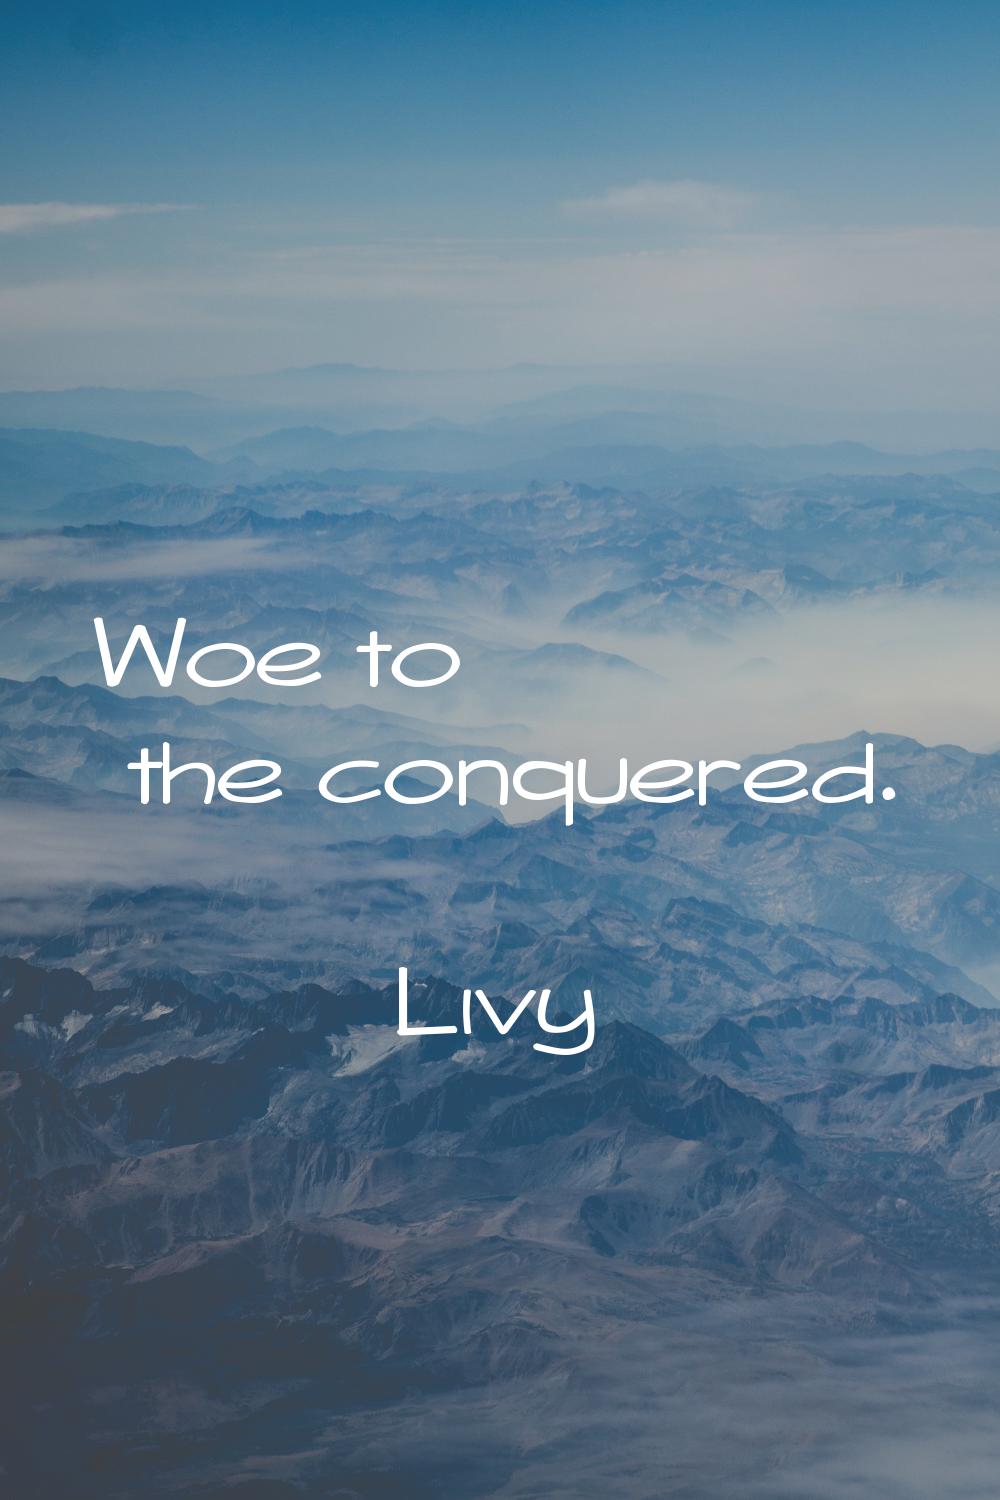 Woe to the conquered.